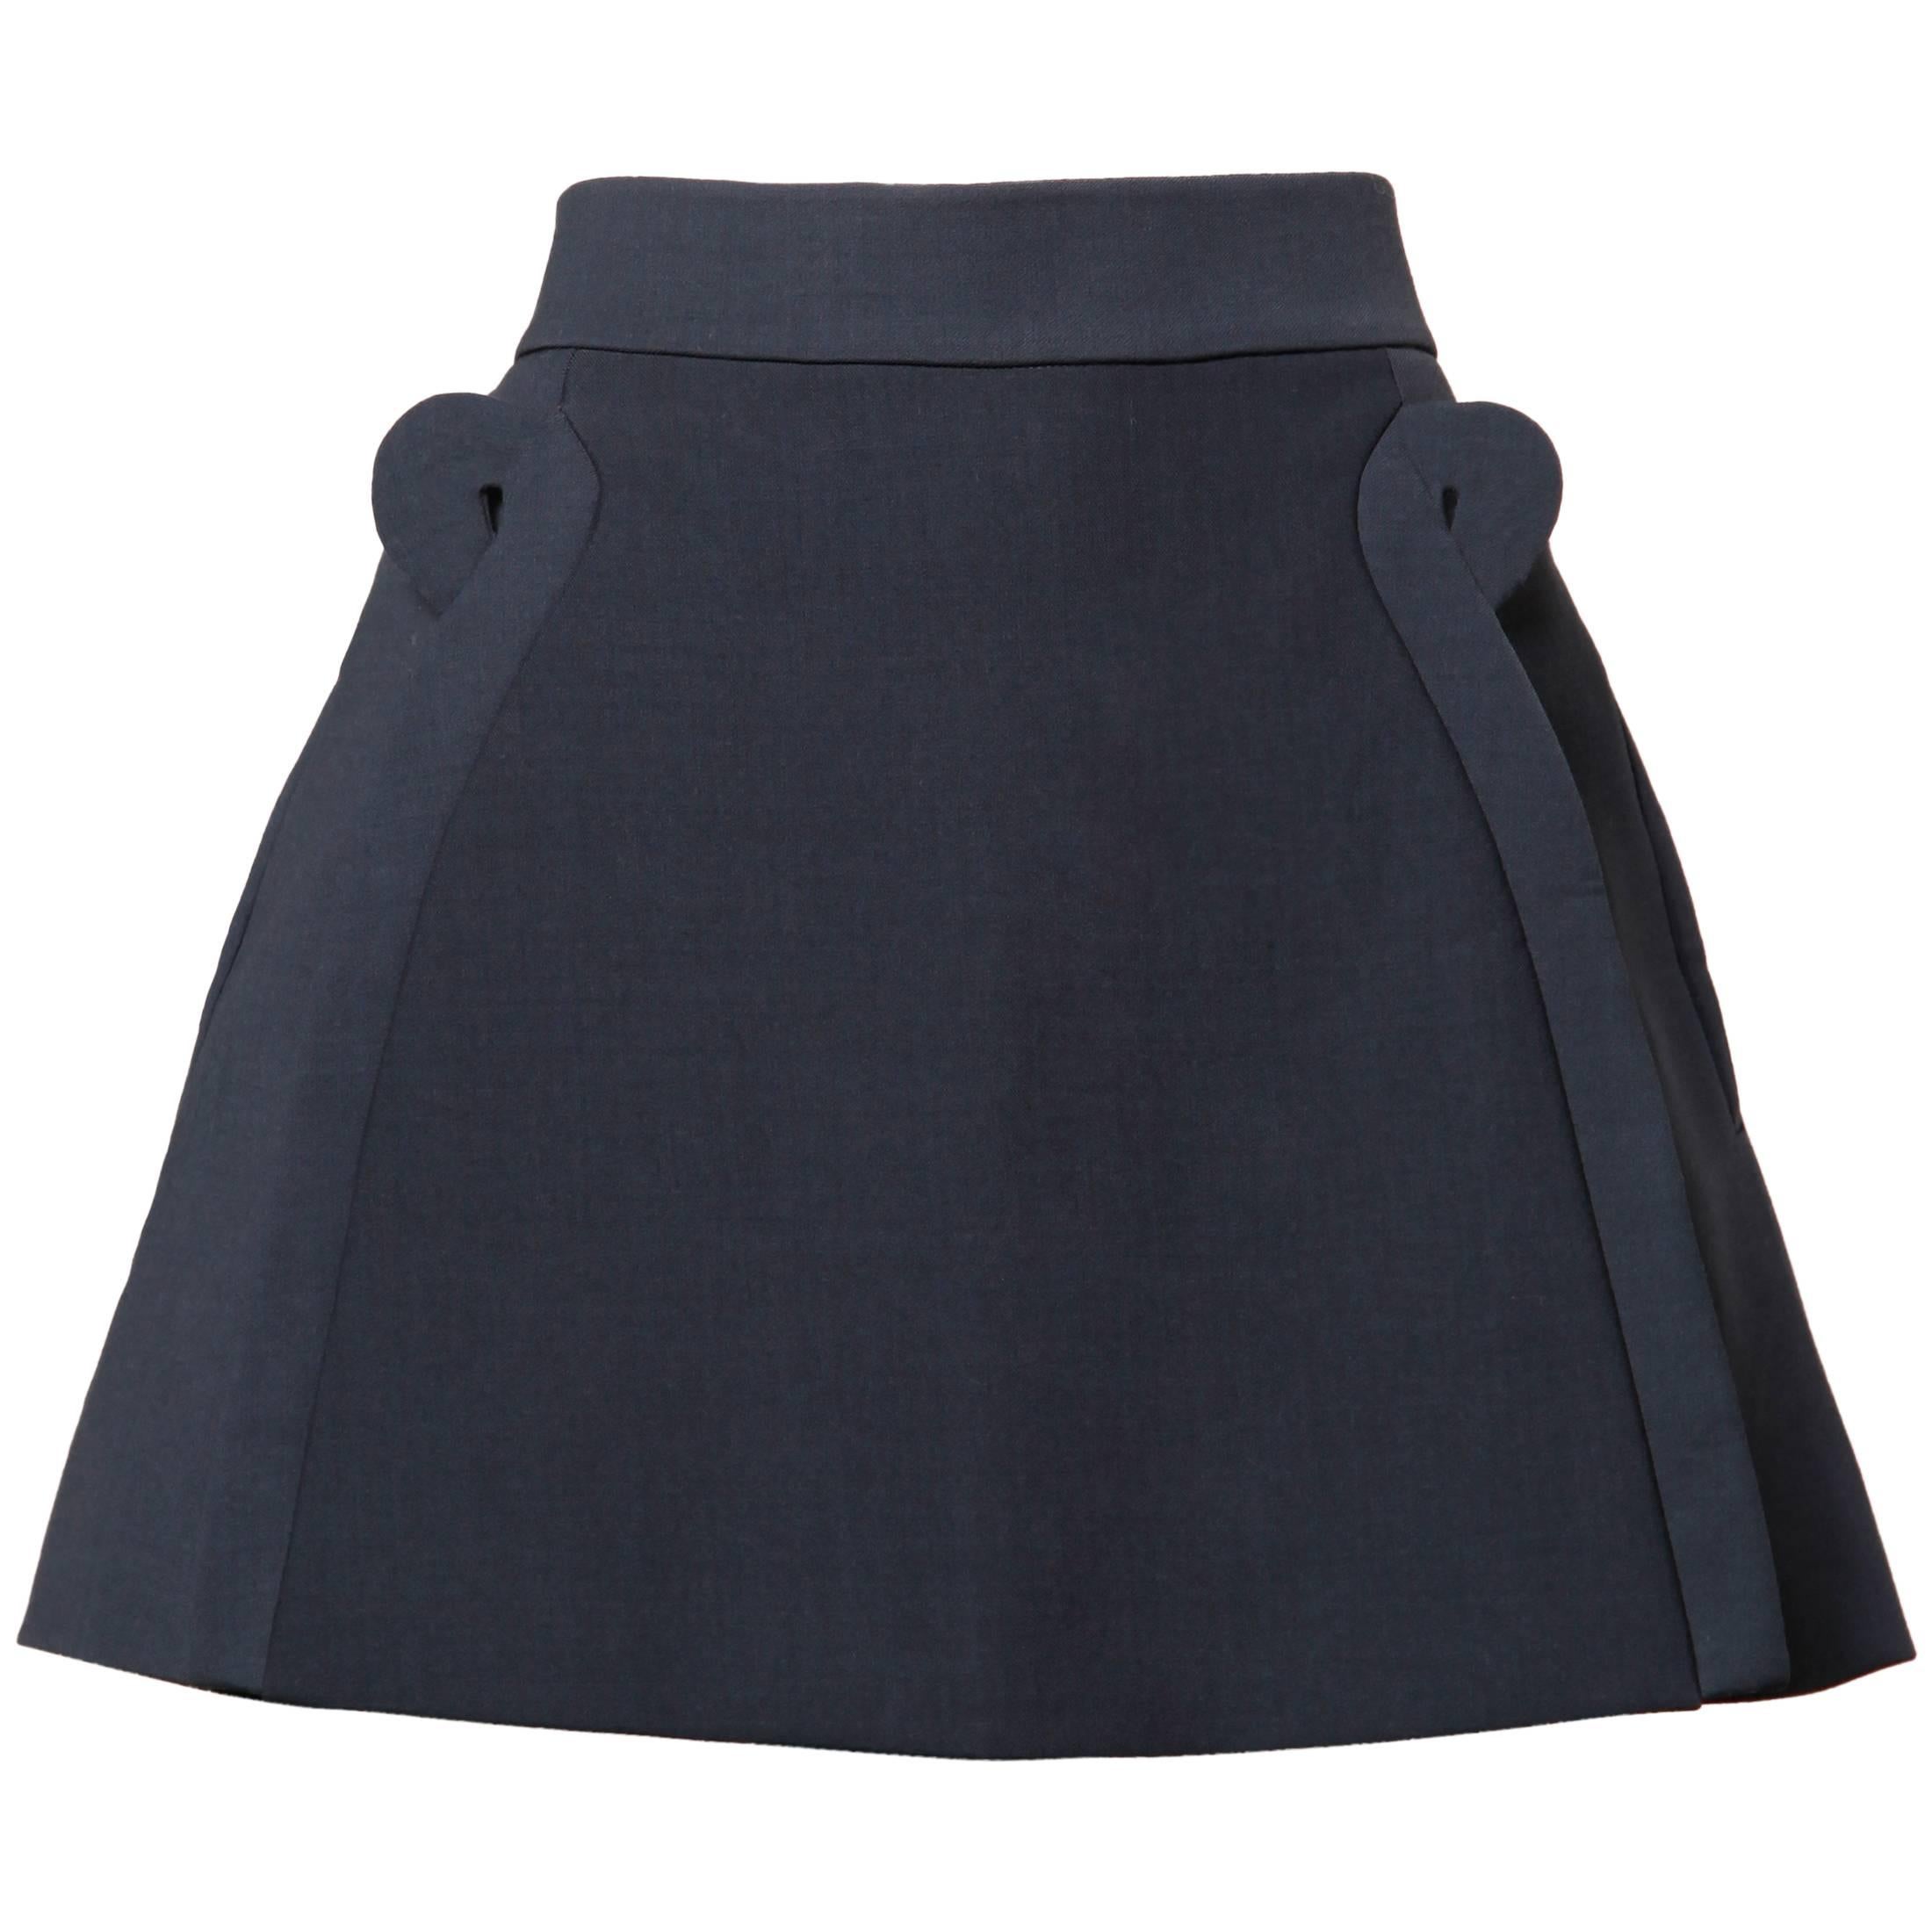 Incredible Delpozo Slate Blue Mini Skirt with Architectural Cut Out Detail